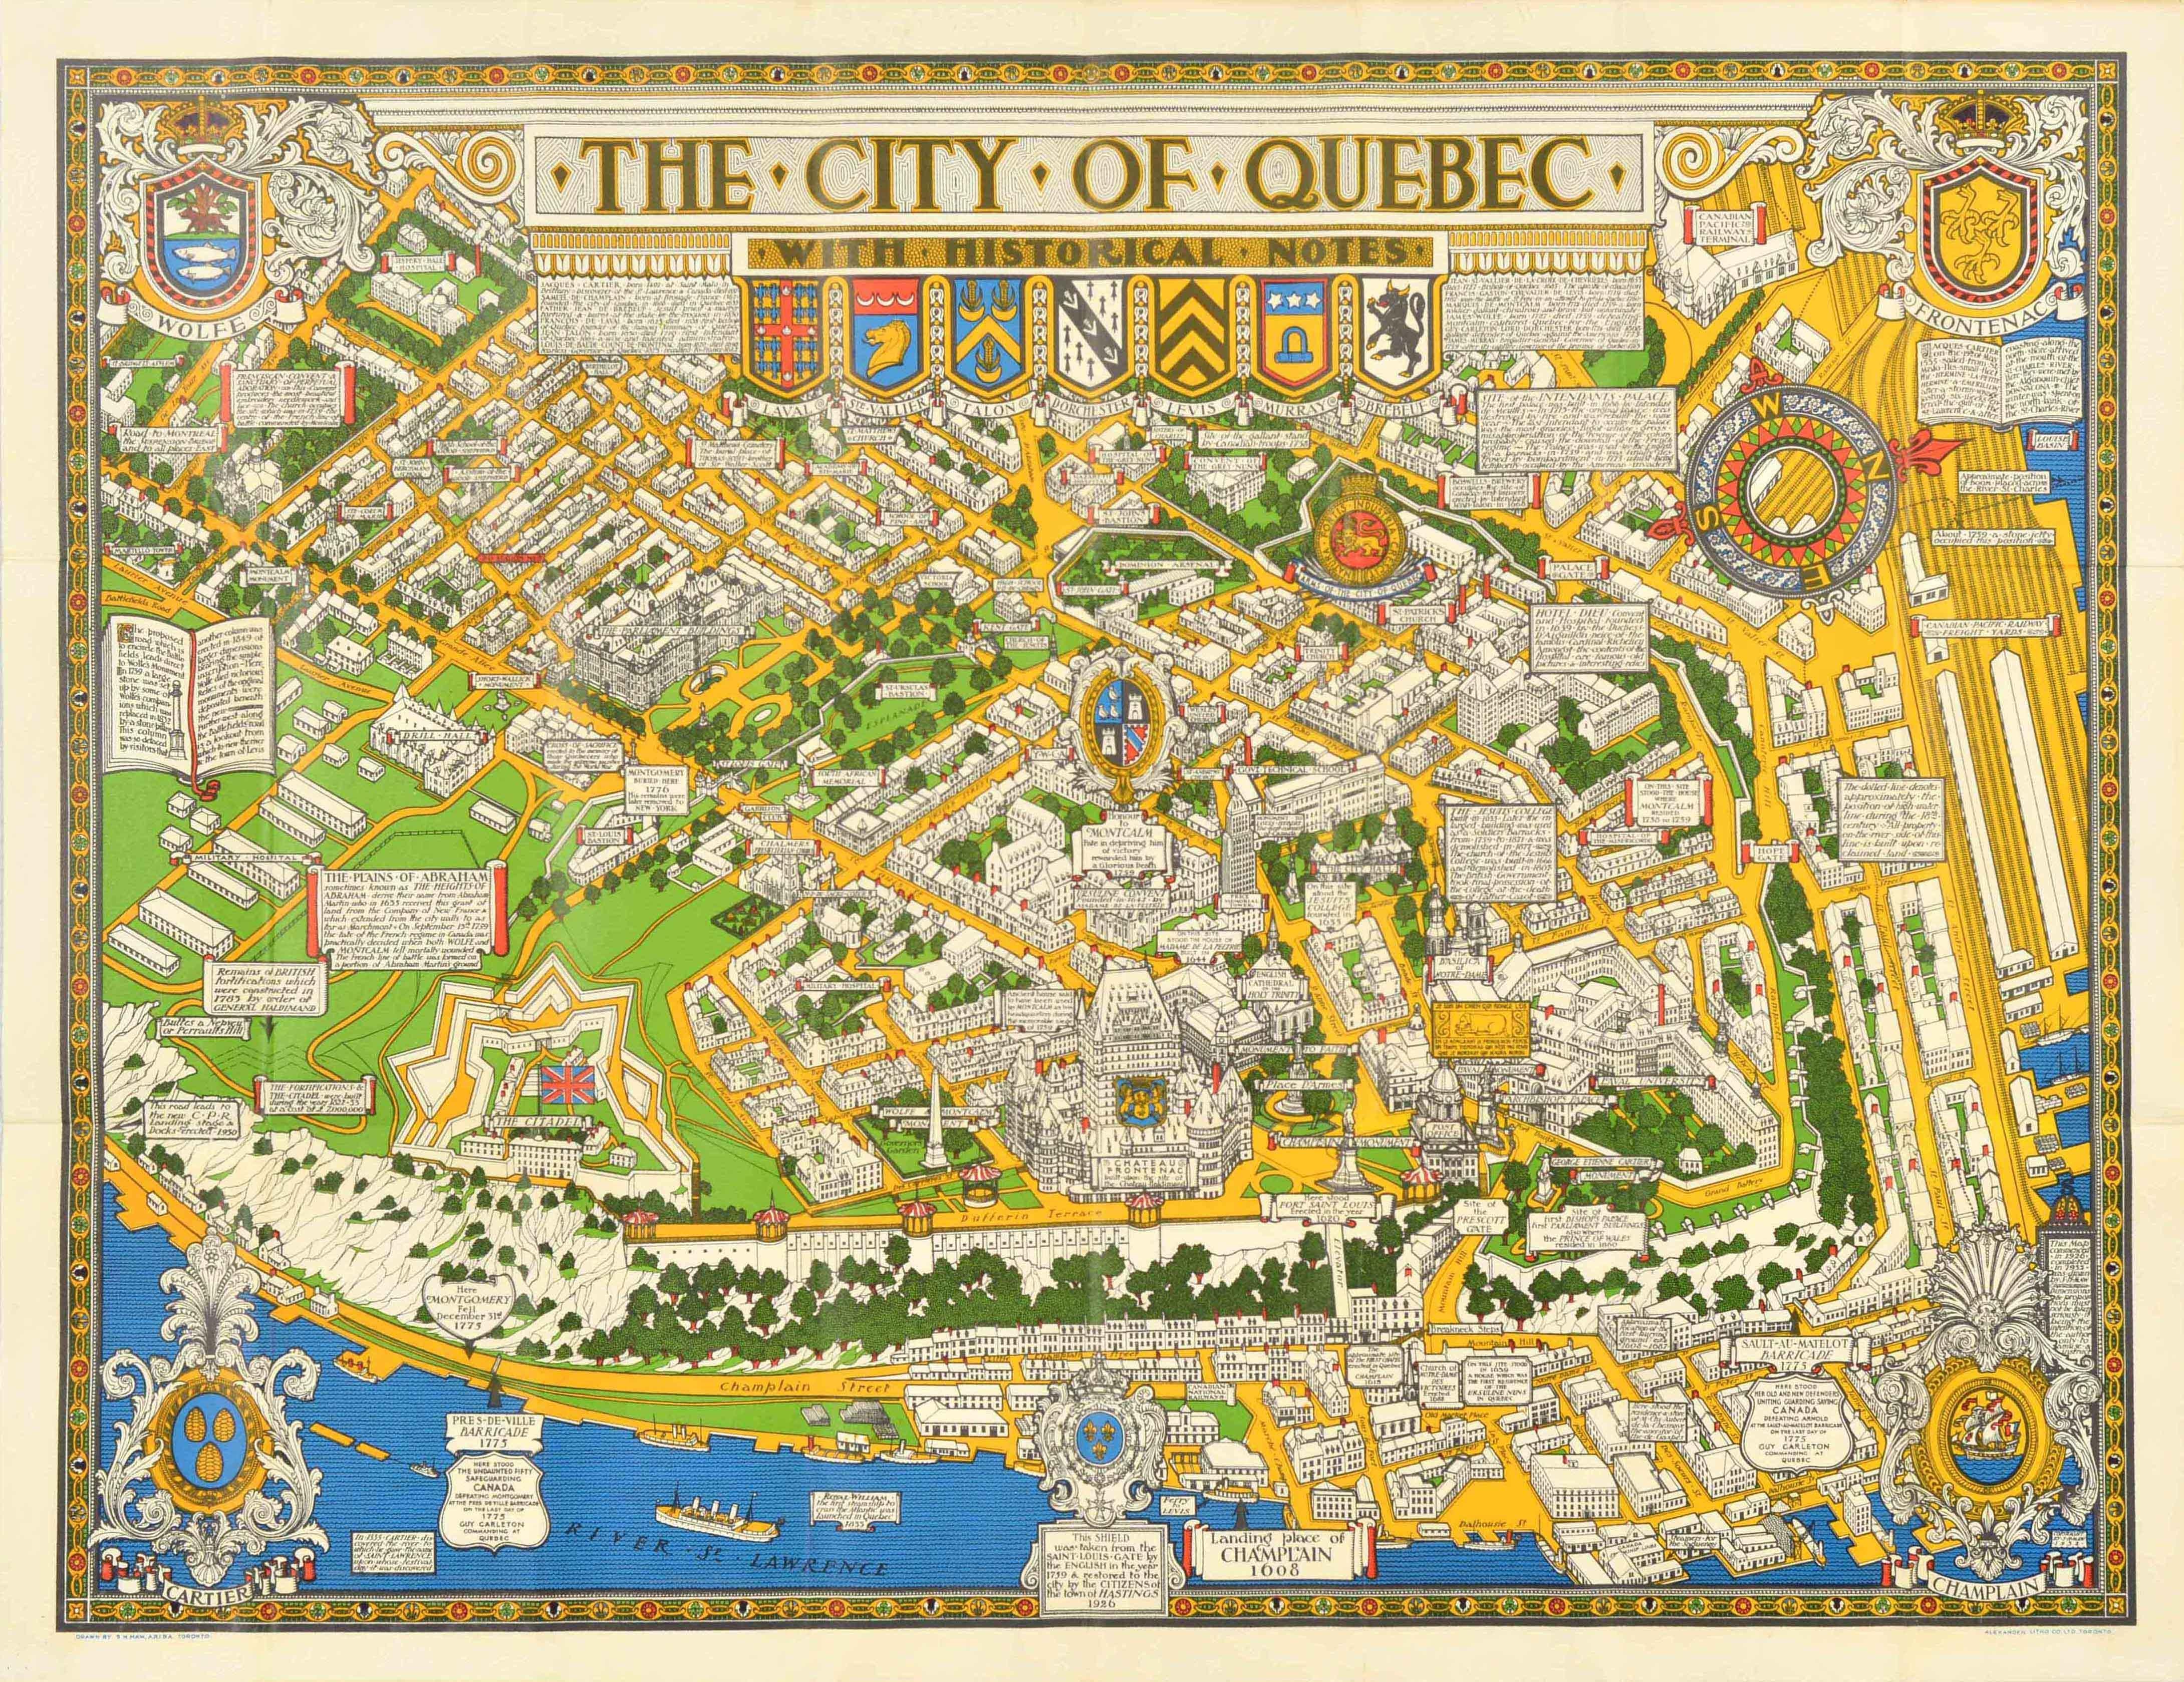 Unknown Print - Original Vintage Travel Poster Quebec Map With Historical Notes Canada Pictorial